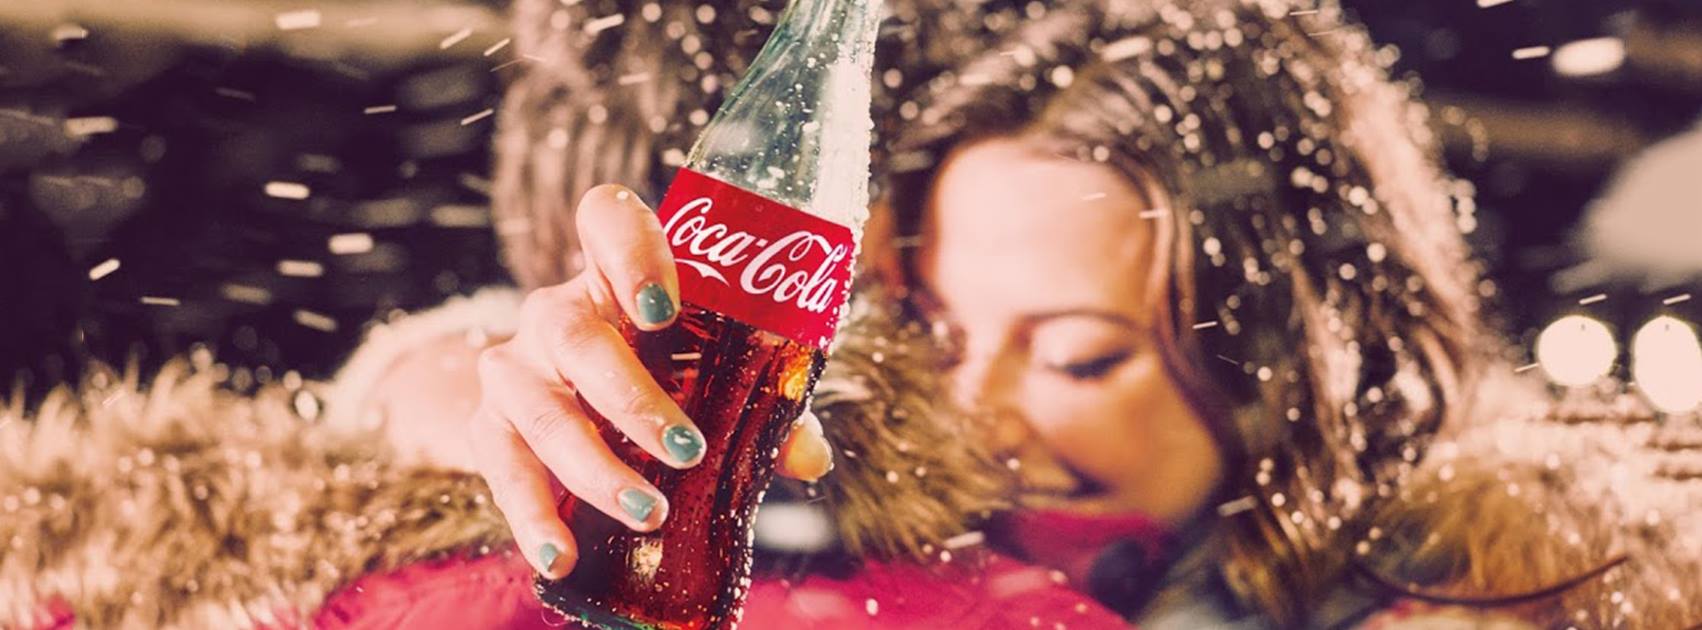 Coca-Cola: Receive a $10 Amazon gift card with 5 codes